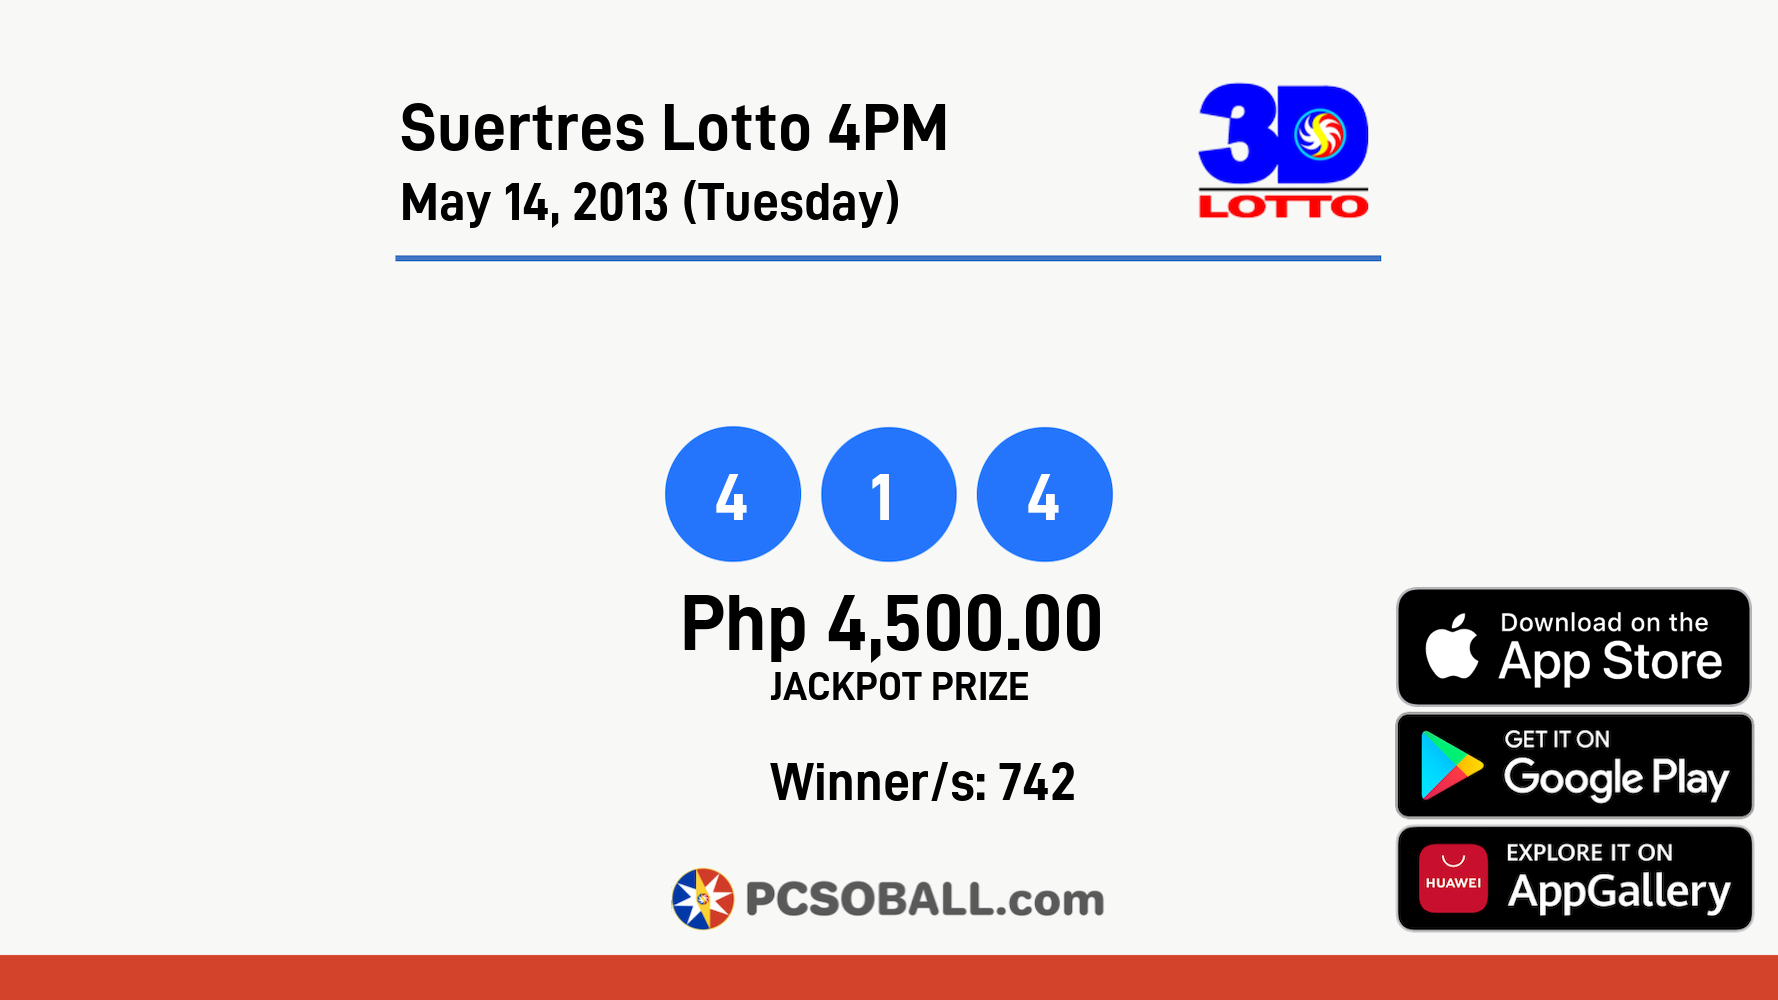 Suertres Lotto 4PM May 14, 2013 (Tuesday) Result